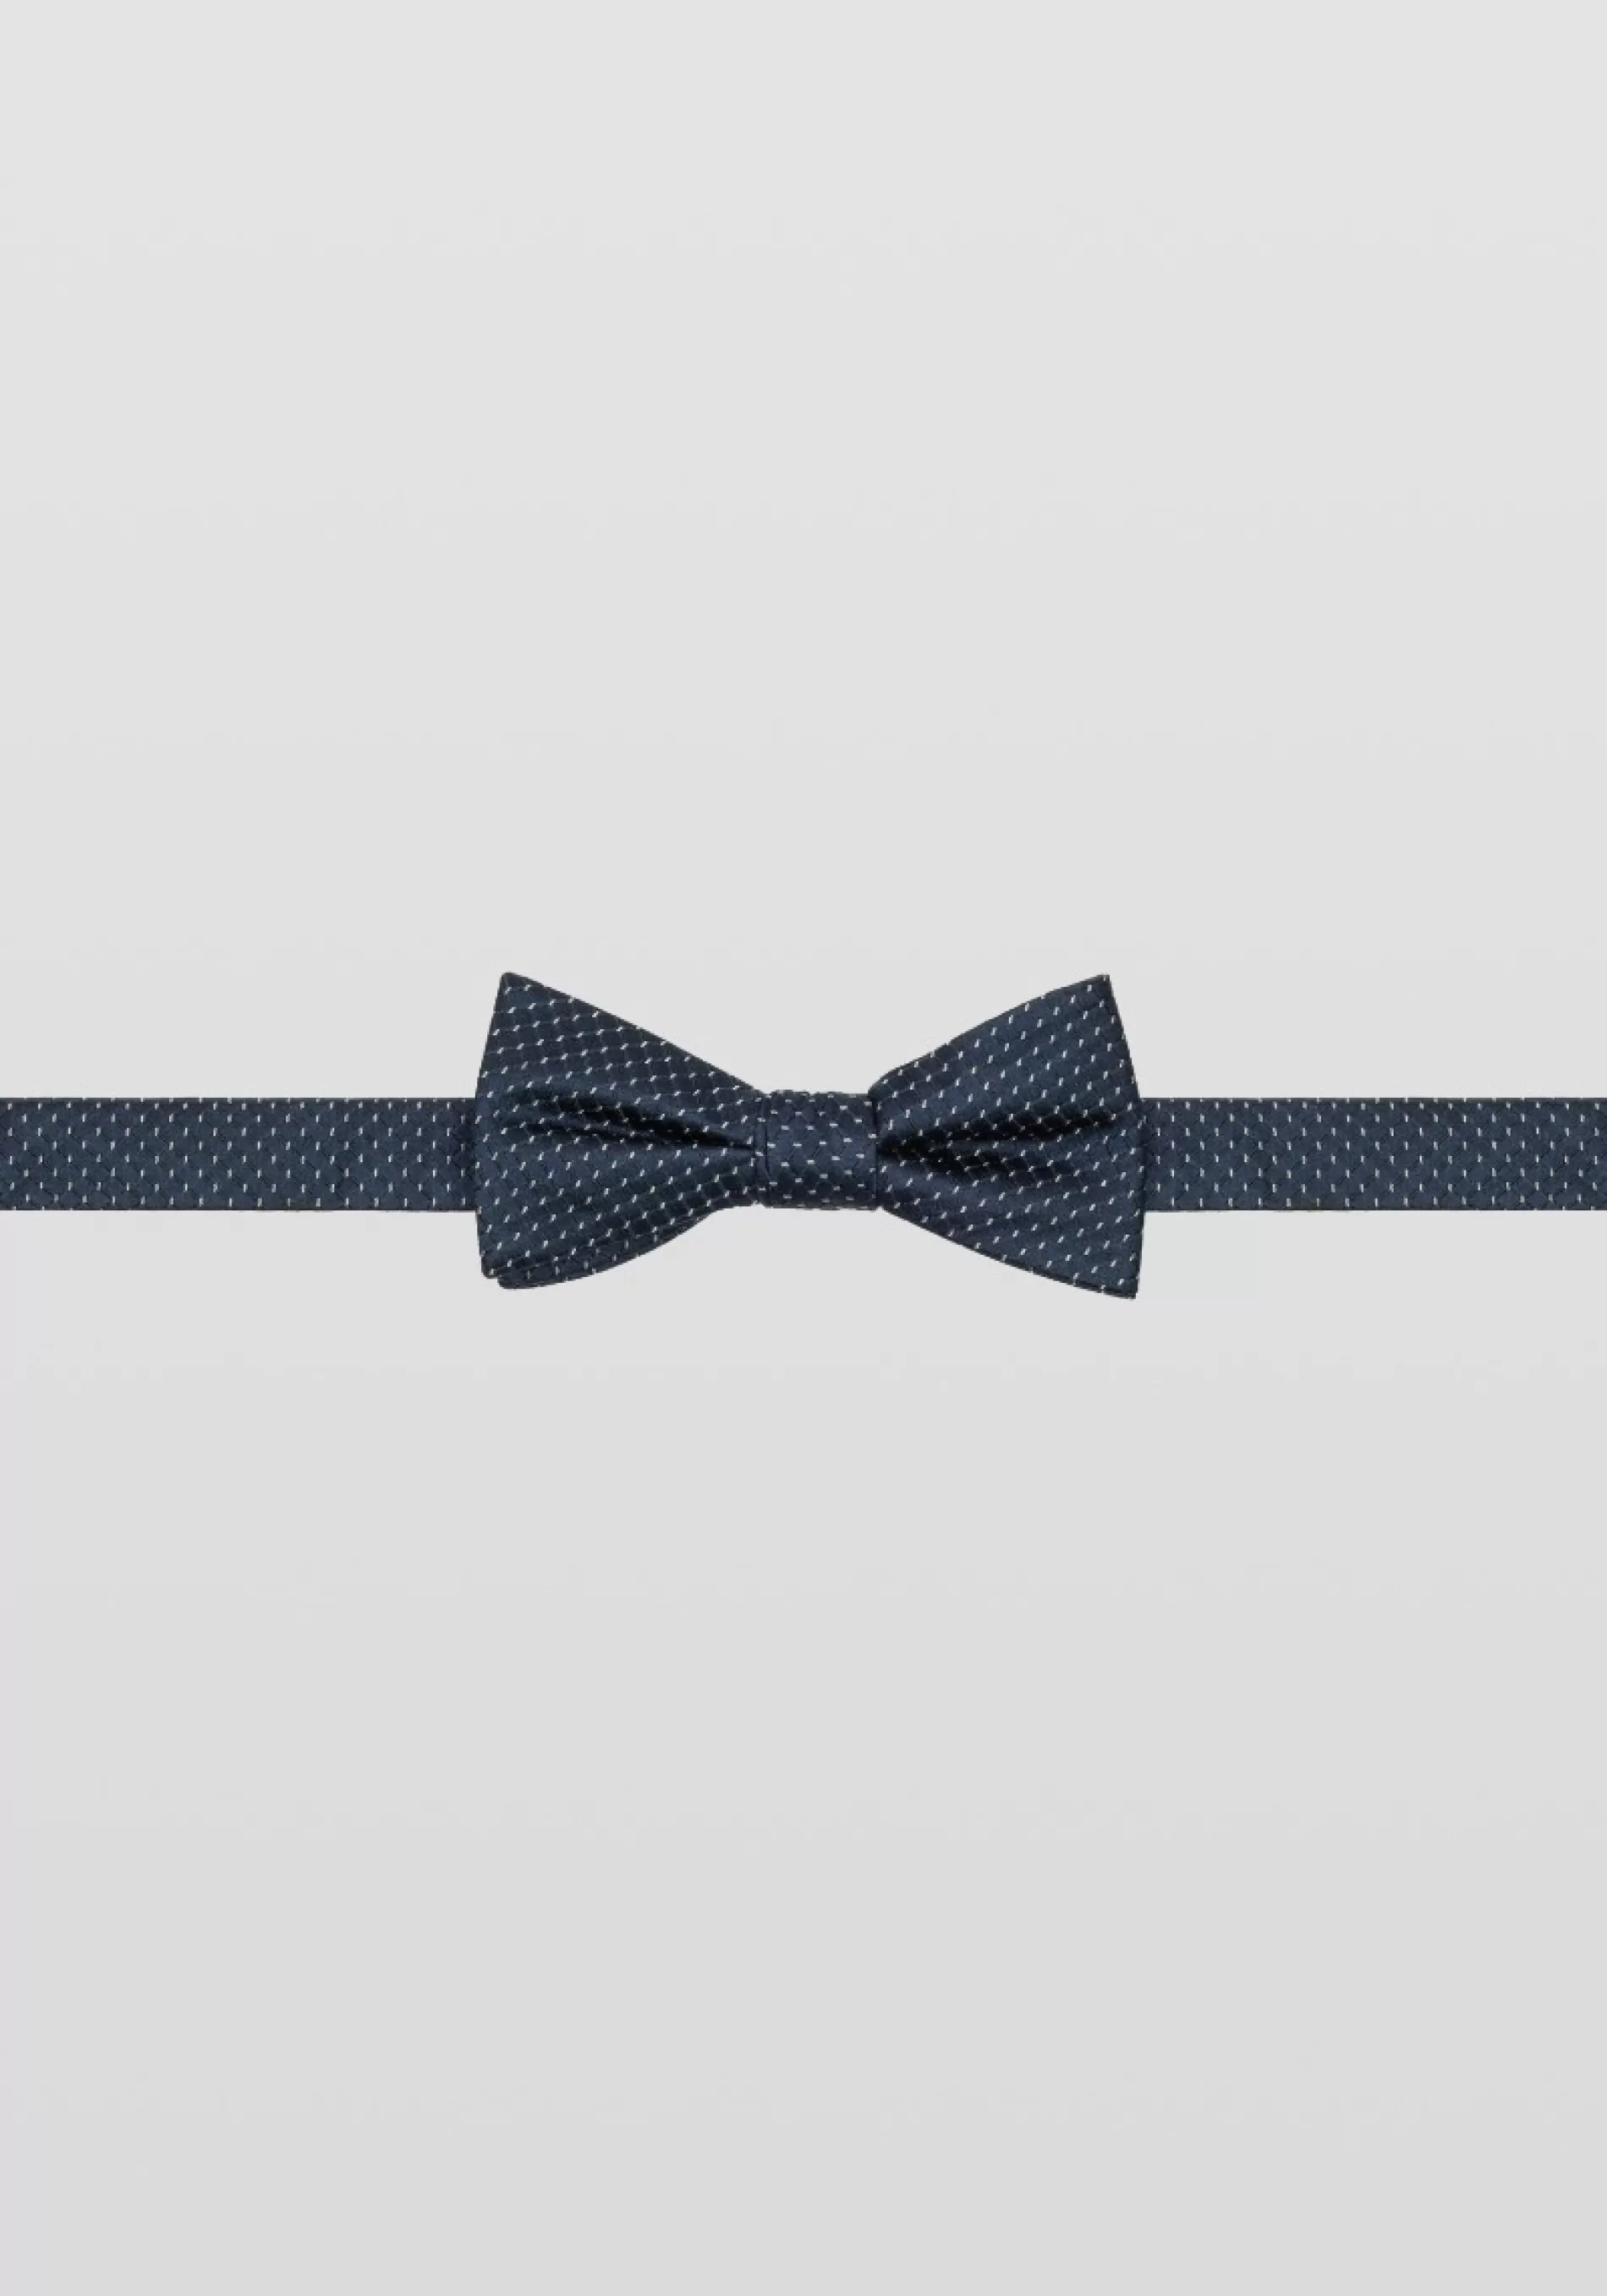 New SILK BOW TIE WITH MICRODOTS Ties and Bow ties